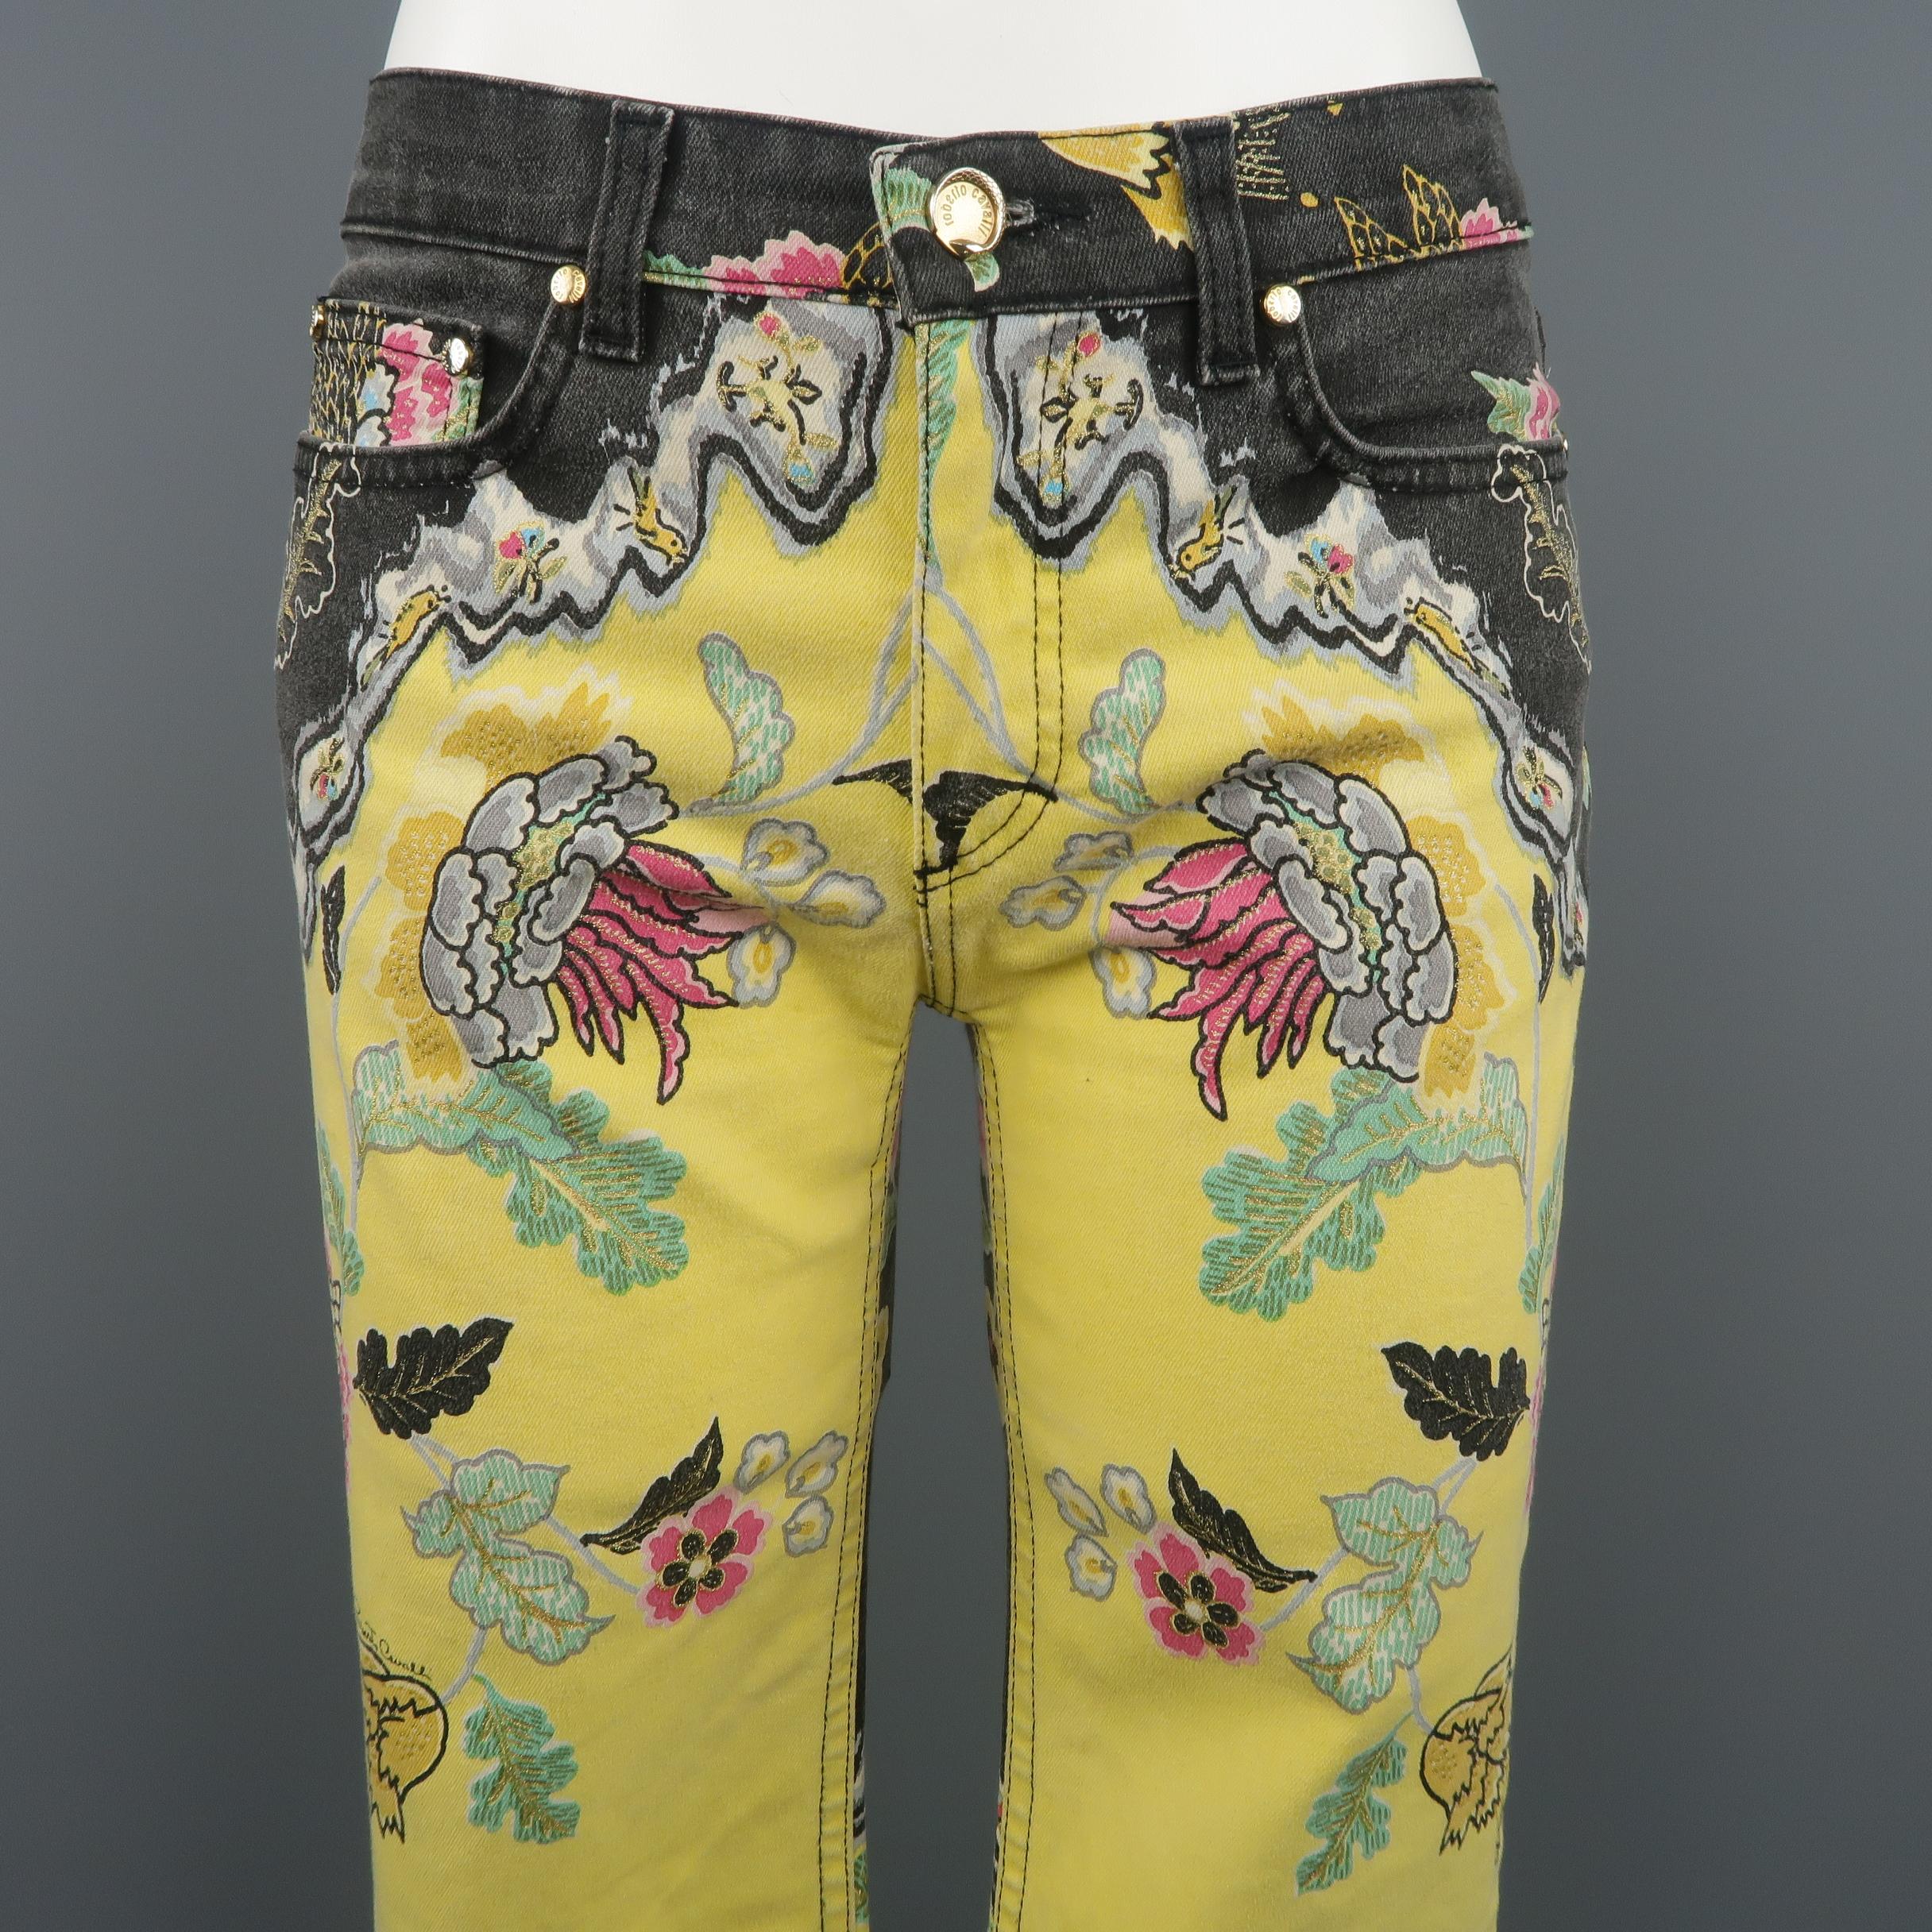 ROBERTO CAVALLI straight leg jeans come in yellow denim with washed black panels and all over floral print. Made in Italy.
 
Excellent Pre-Owned Condition.
Marked: S
 
Measurements:
 
Waist: 28 in.
Rise: 8.5 in.
Inseam: 30 in.